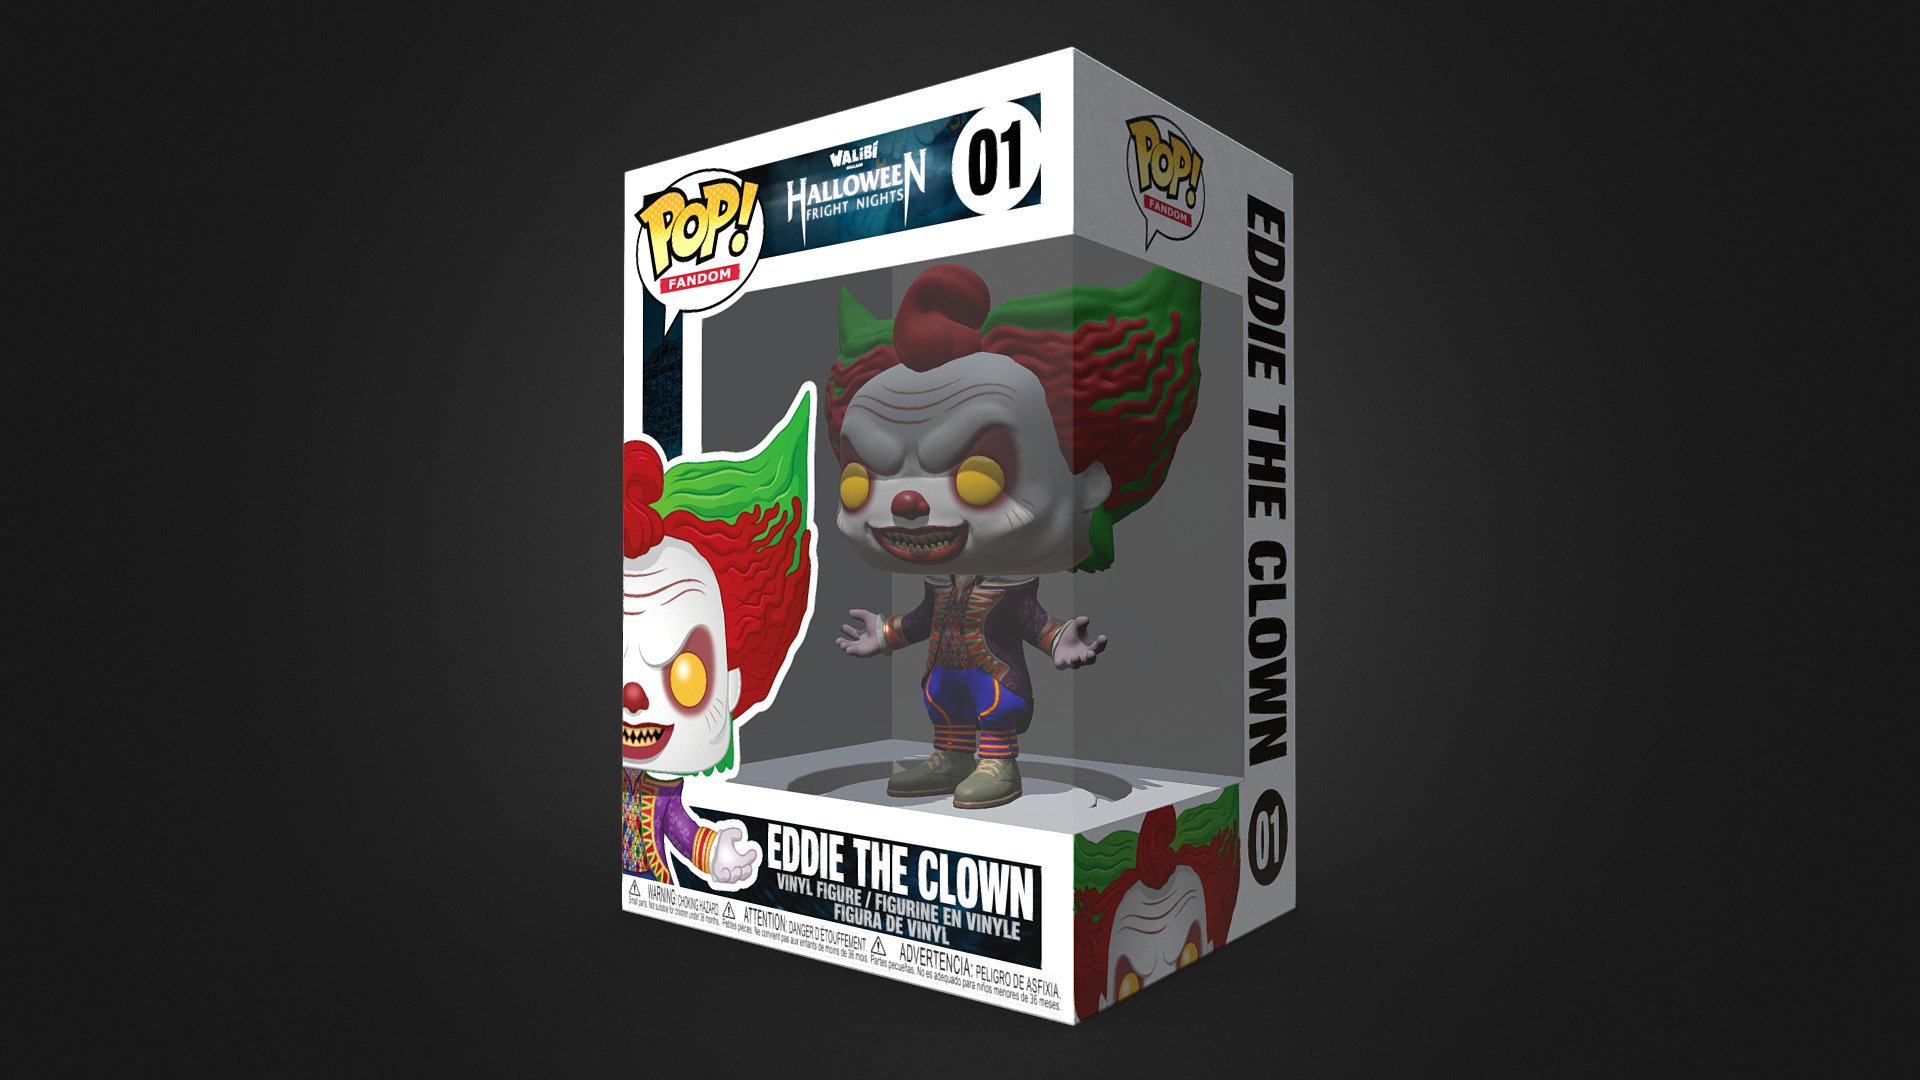 A design I created as a gift for one of my favorite horror clowns, mainly designed to be 3D printed. The box design is also made by me 3d model